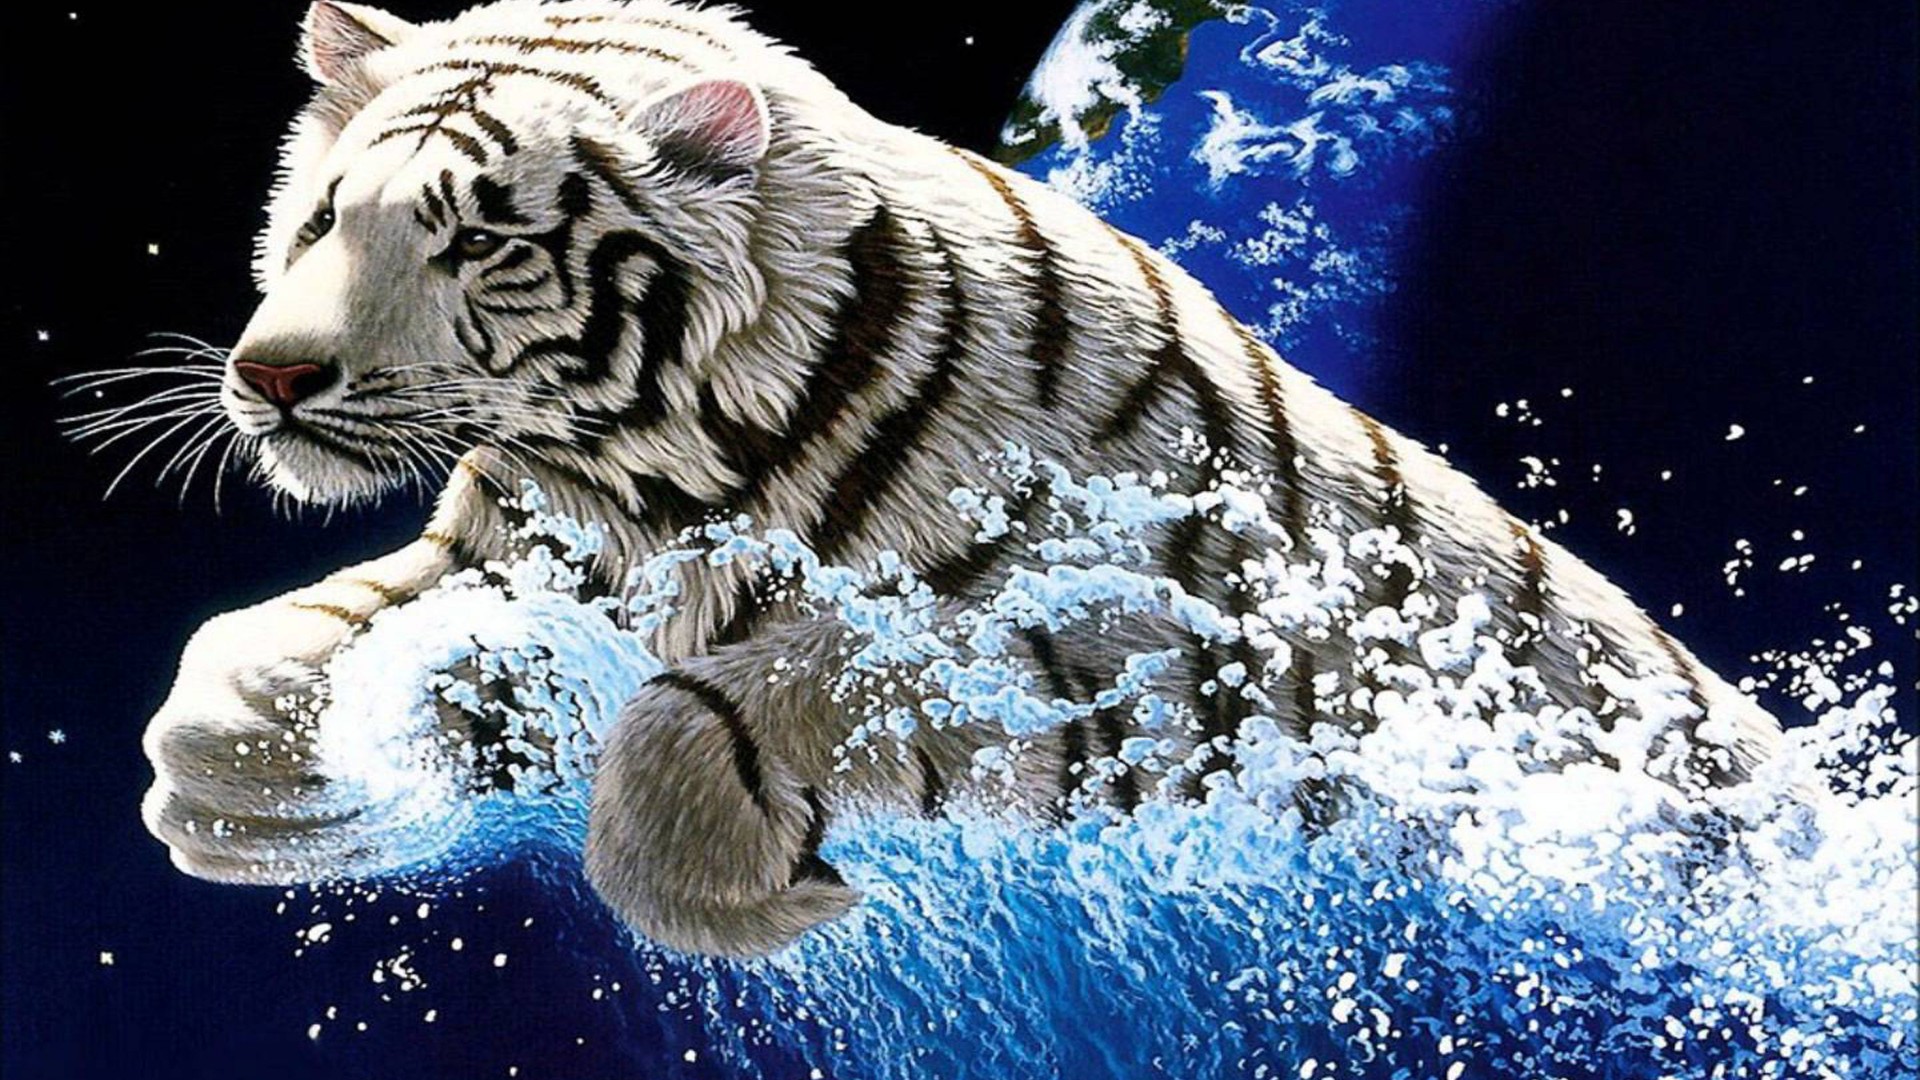 White Tiger Widescreen 3840x2400 Hd Wallpapers 1920x1080